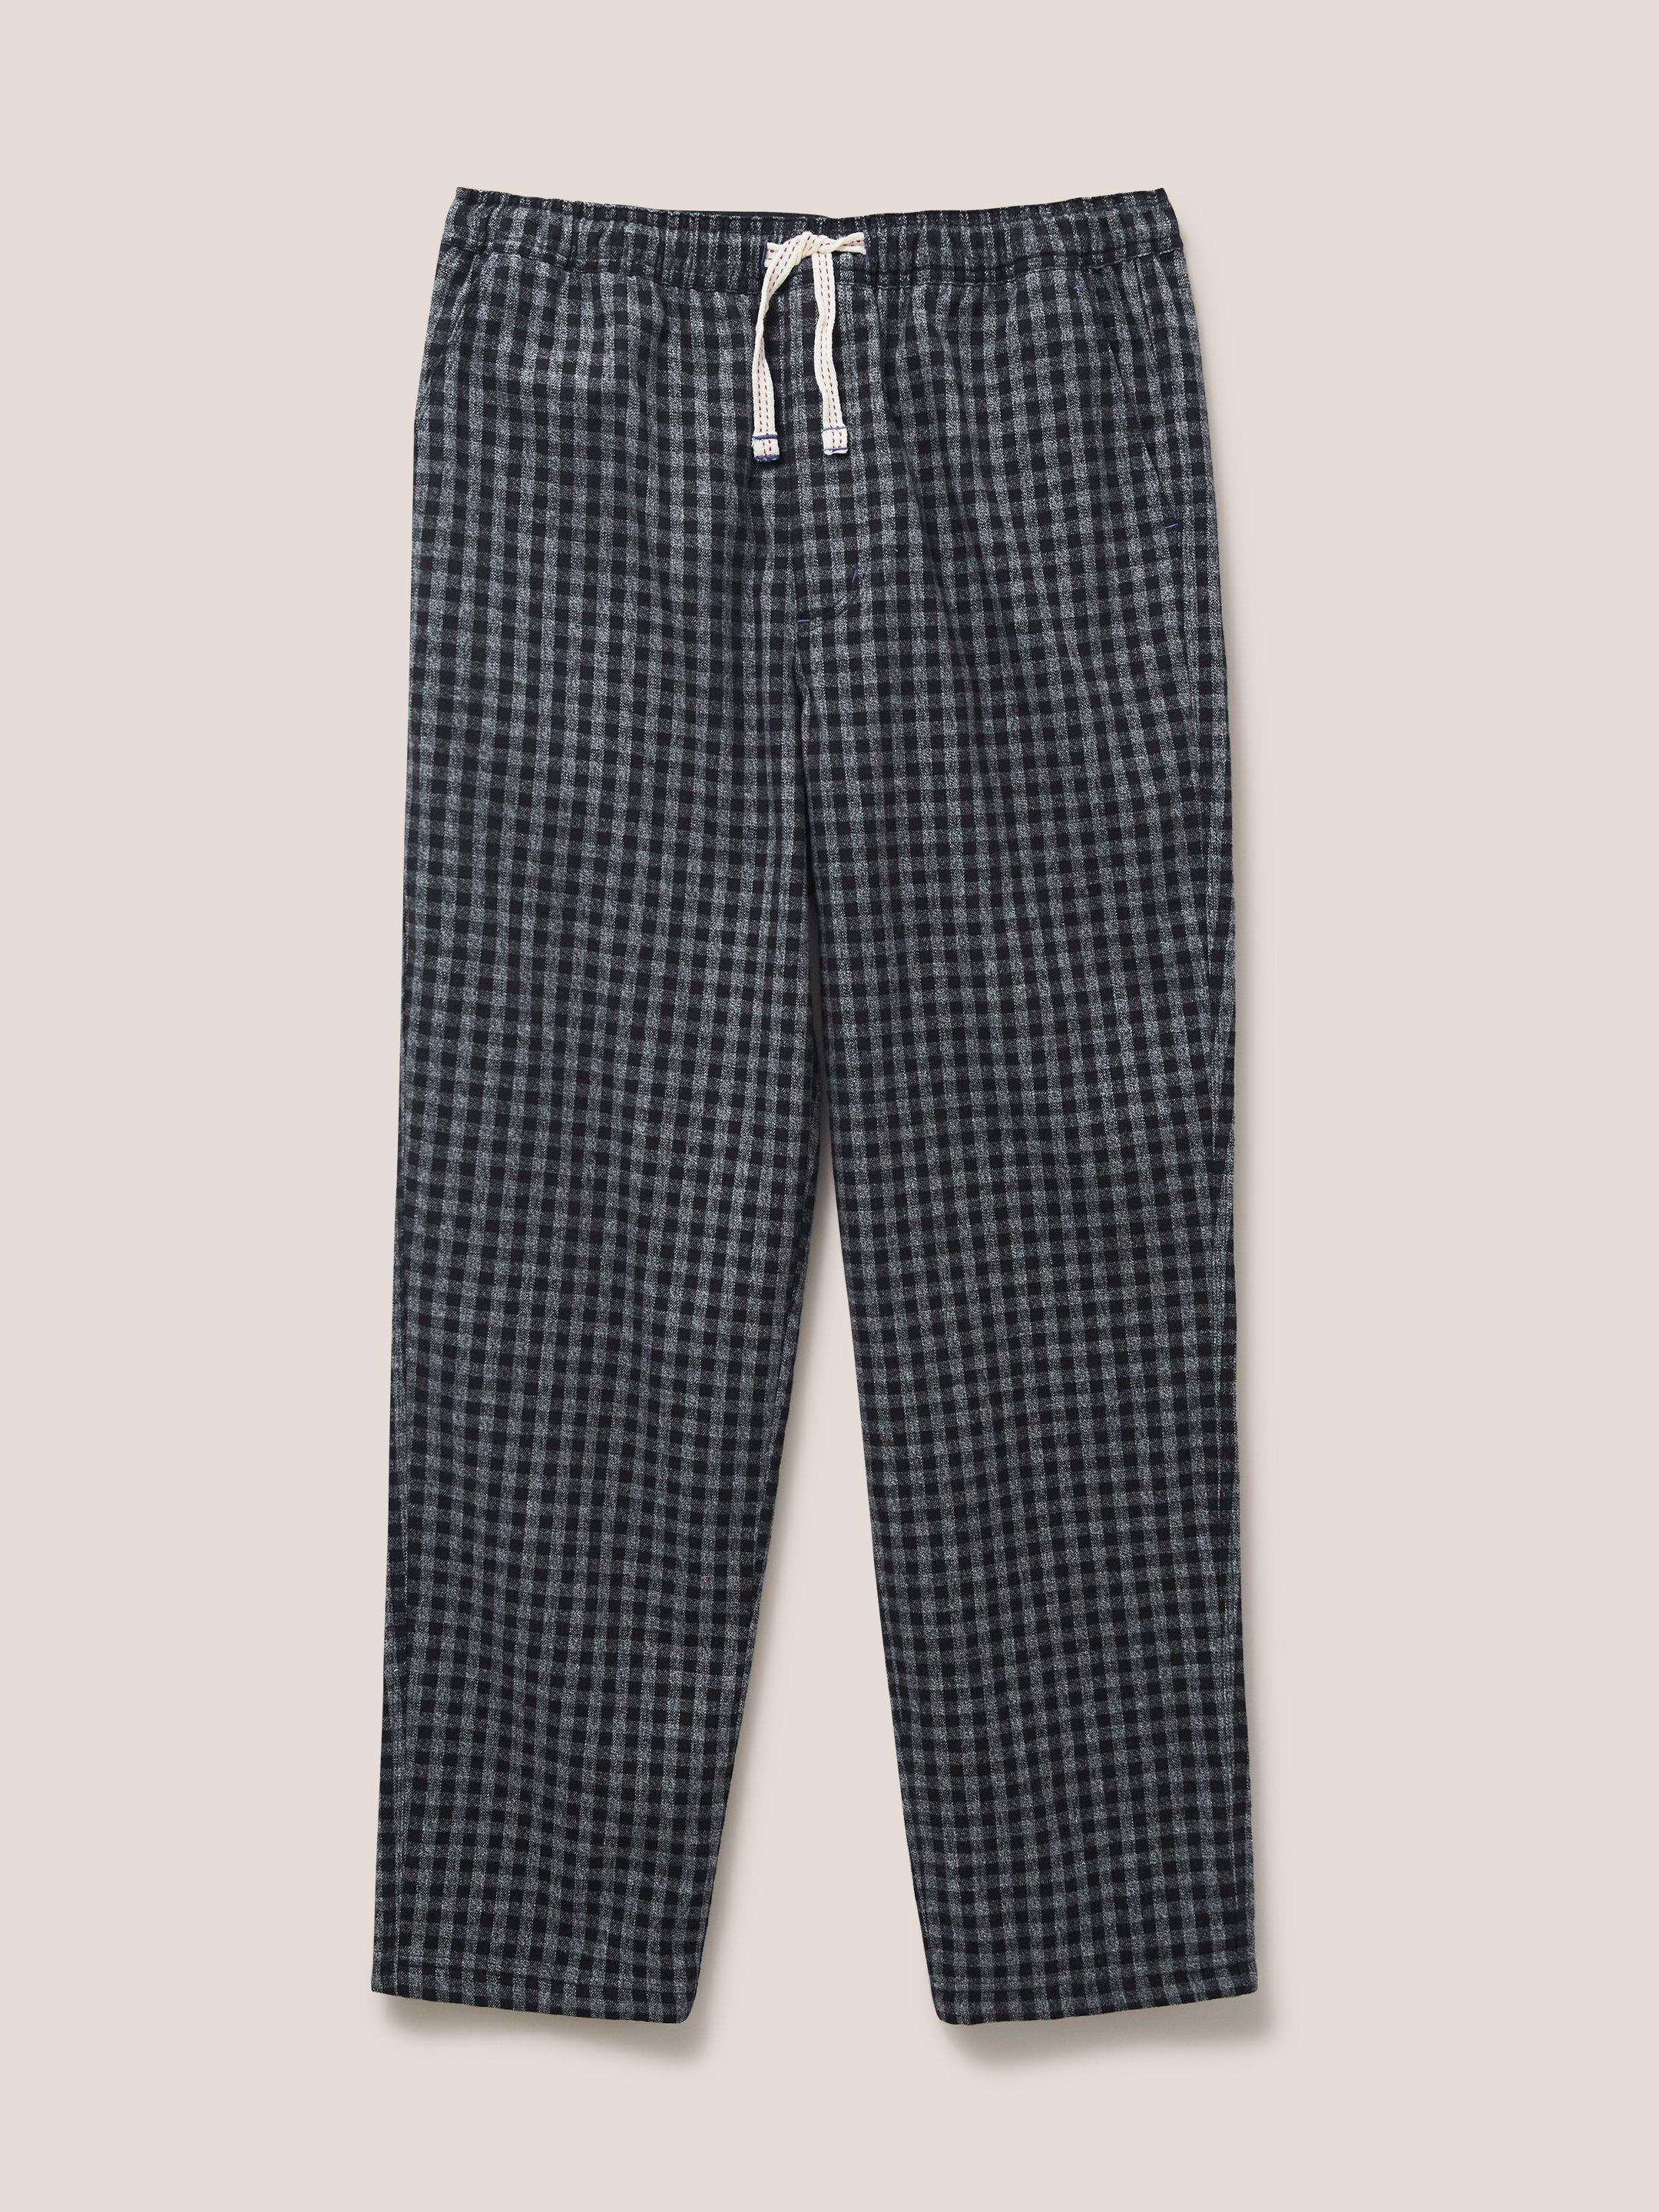 Leyland PJ Trouser in WASHED BLK - FLAT FRONT